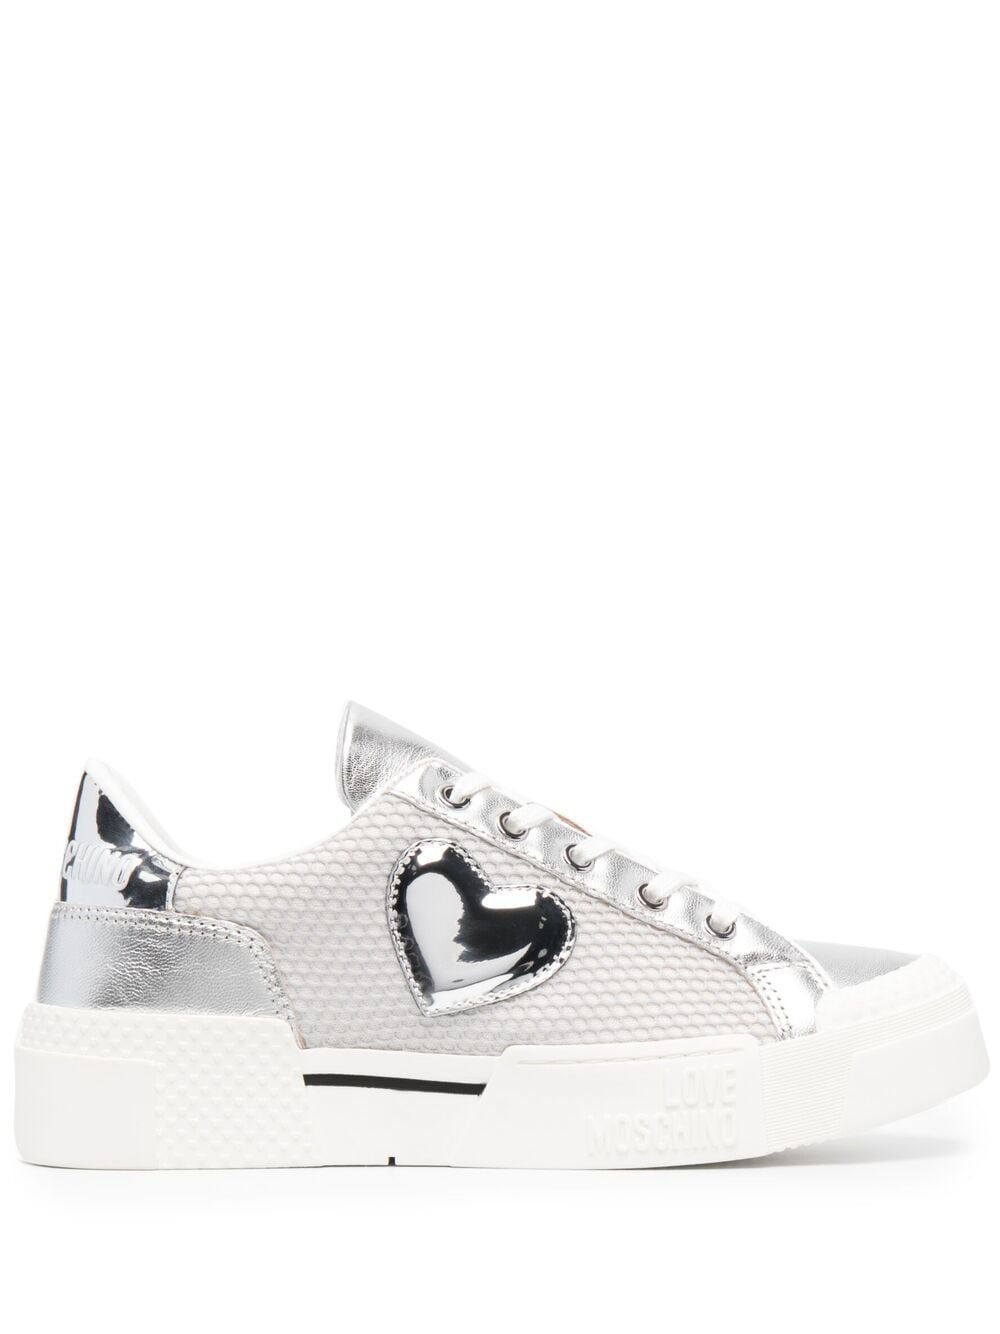 LOVE MOSCHINO SILVER SIDE HEART PATCH SNEAKER